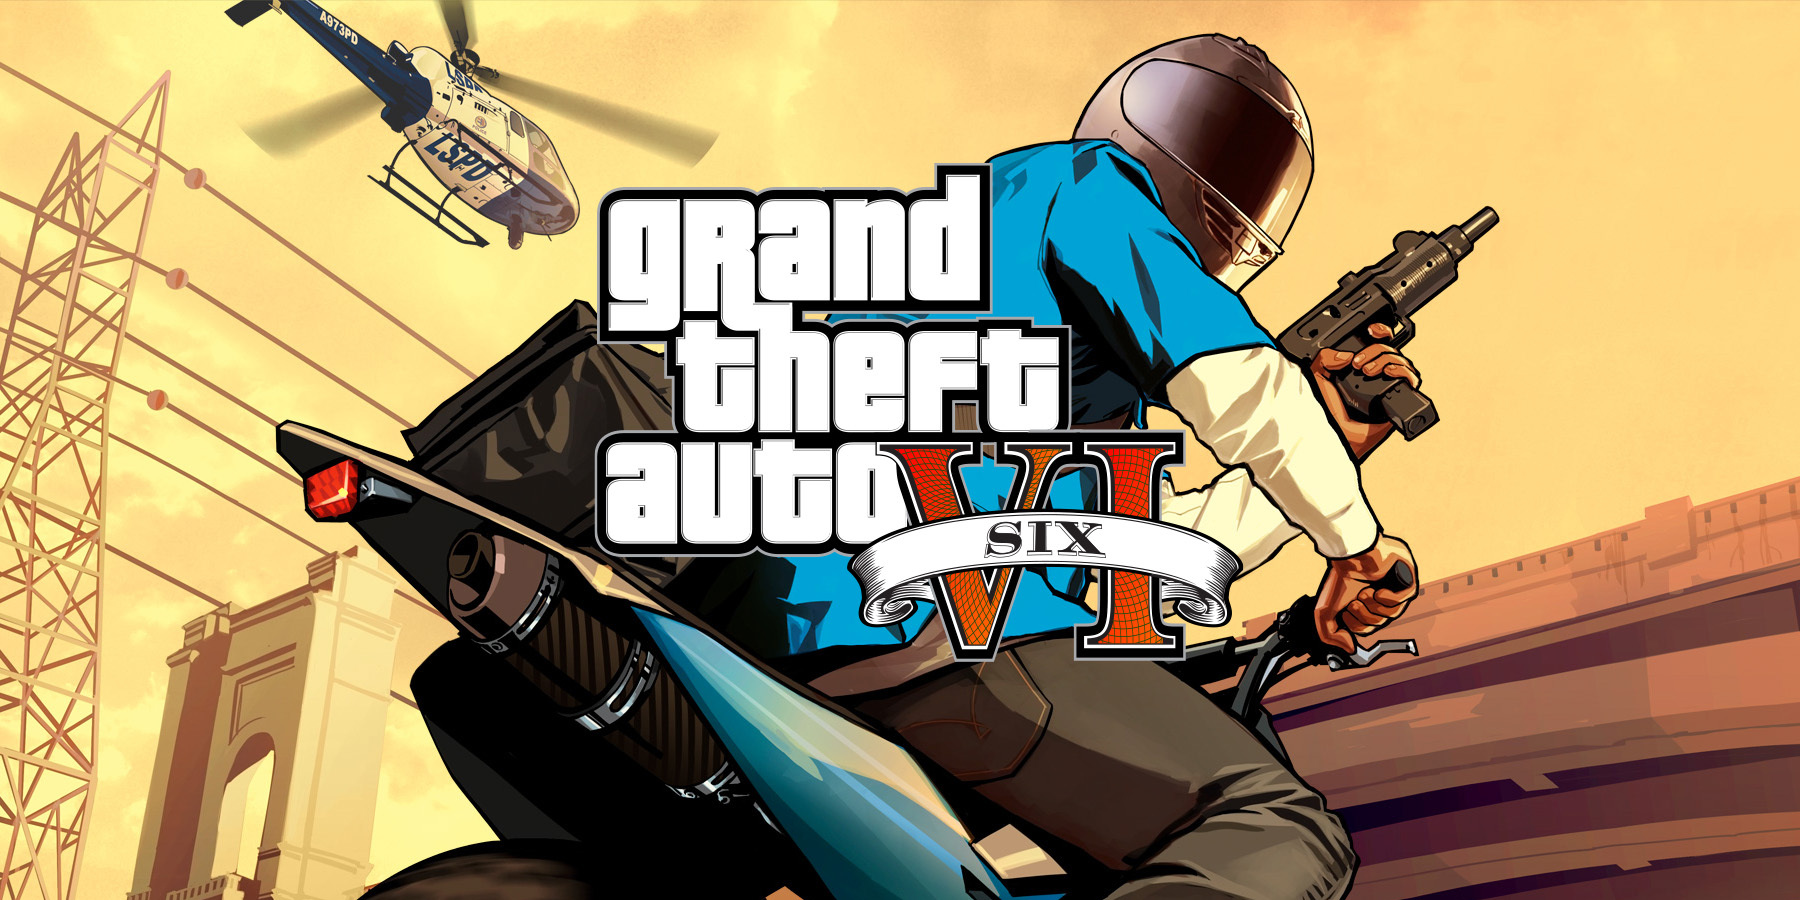 grand theft auto 6 logo and motorcycle